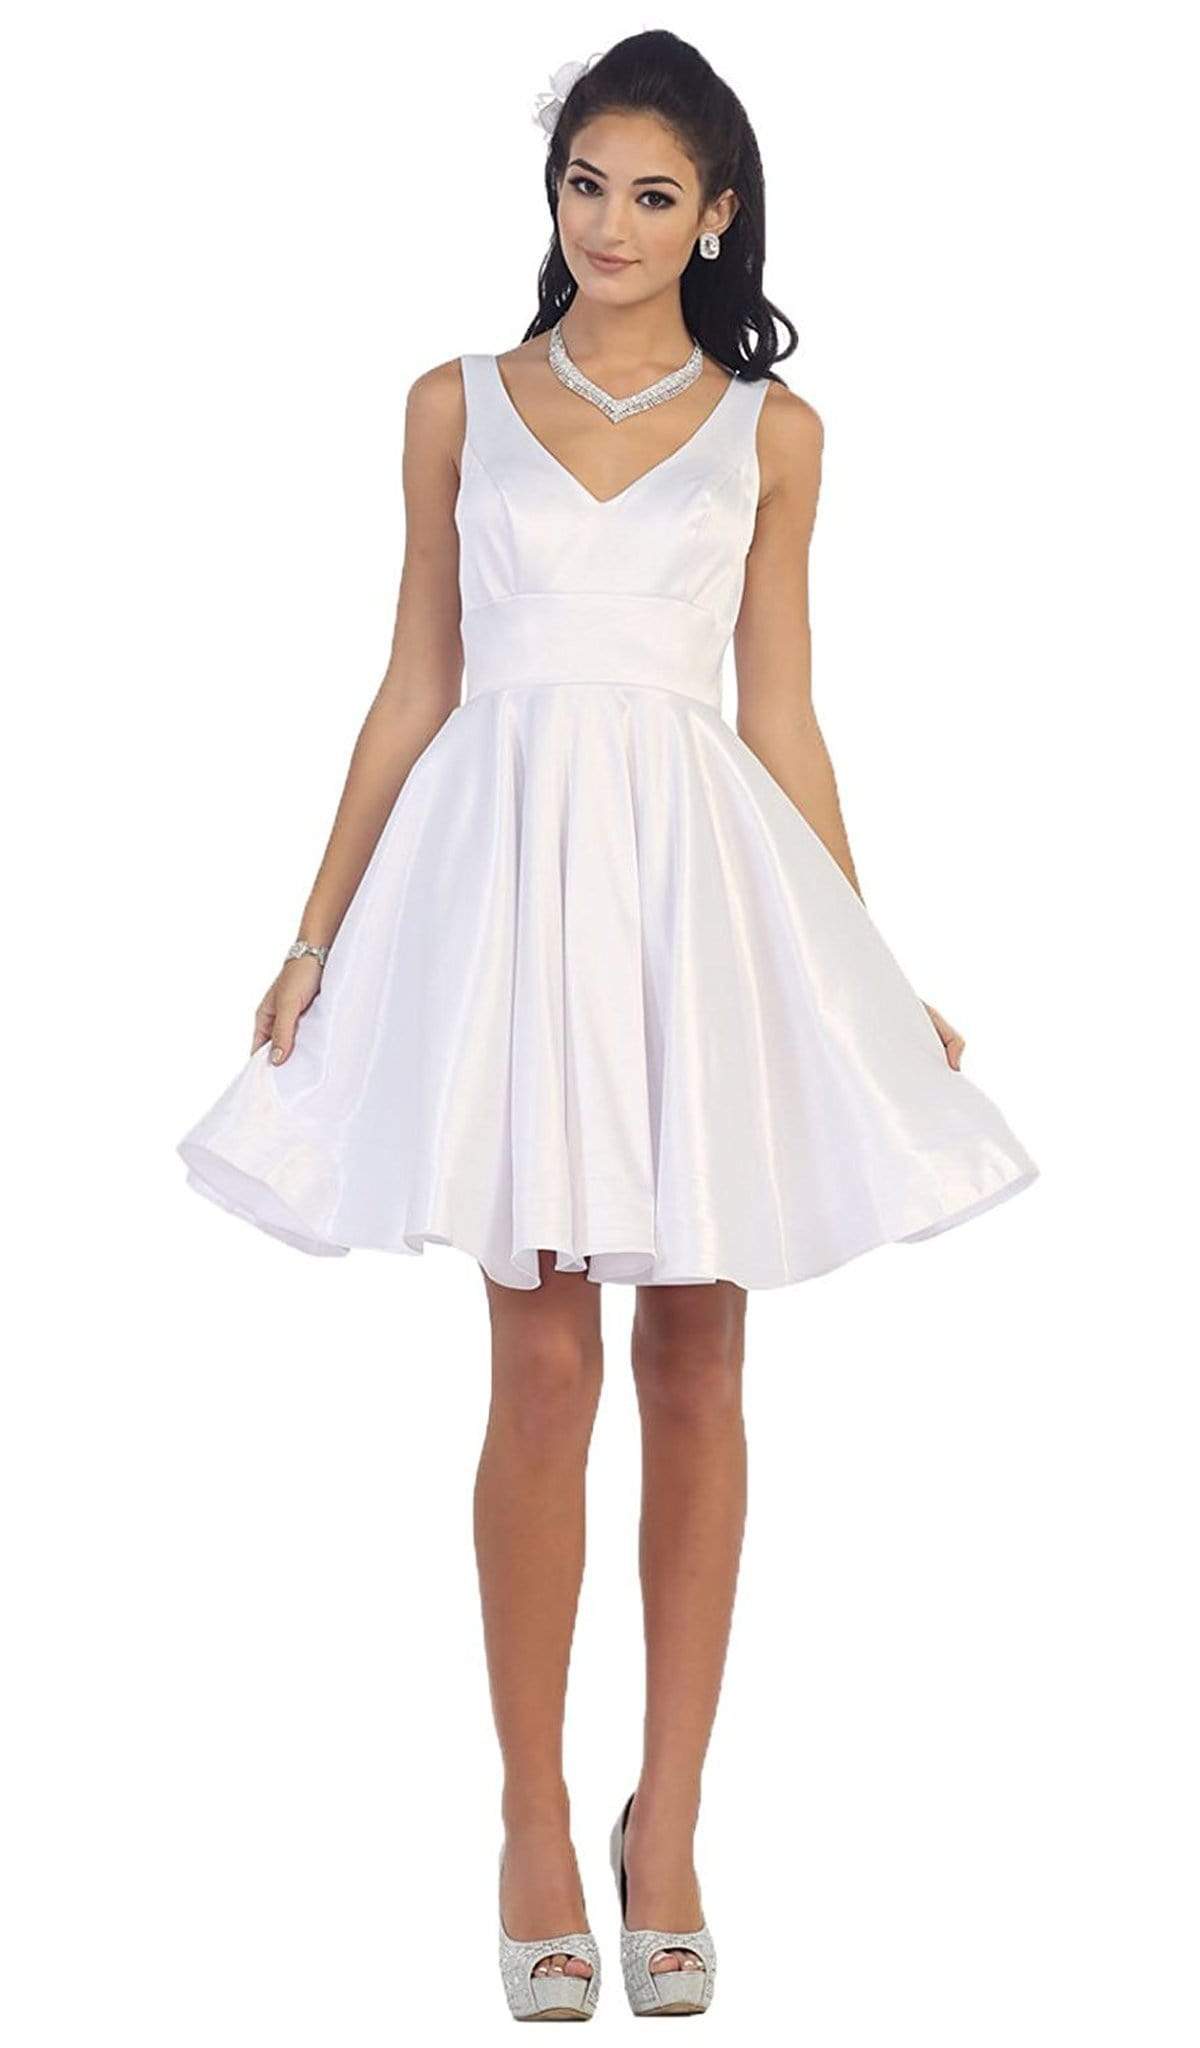 May Queen - MQ1410 Charming V-Neck and Back A-Line Homecoming Dress Special Occasion Dress 4 / White